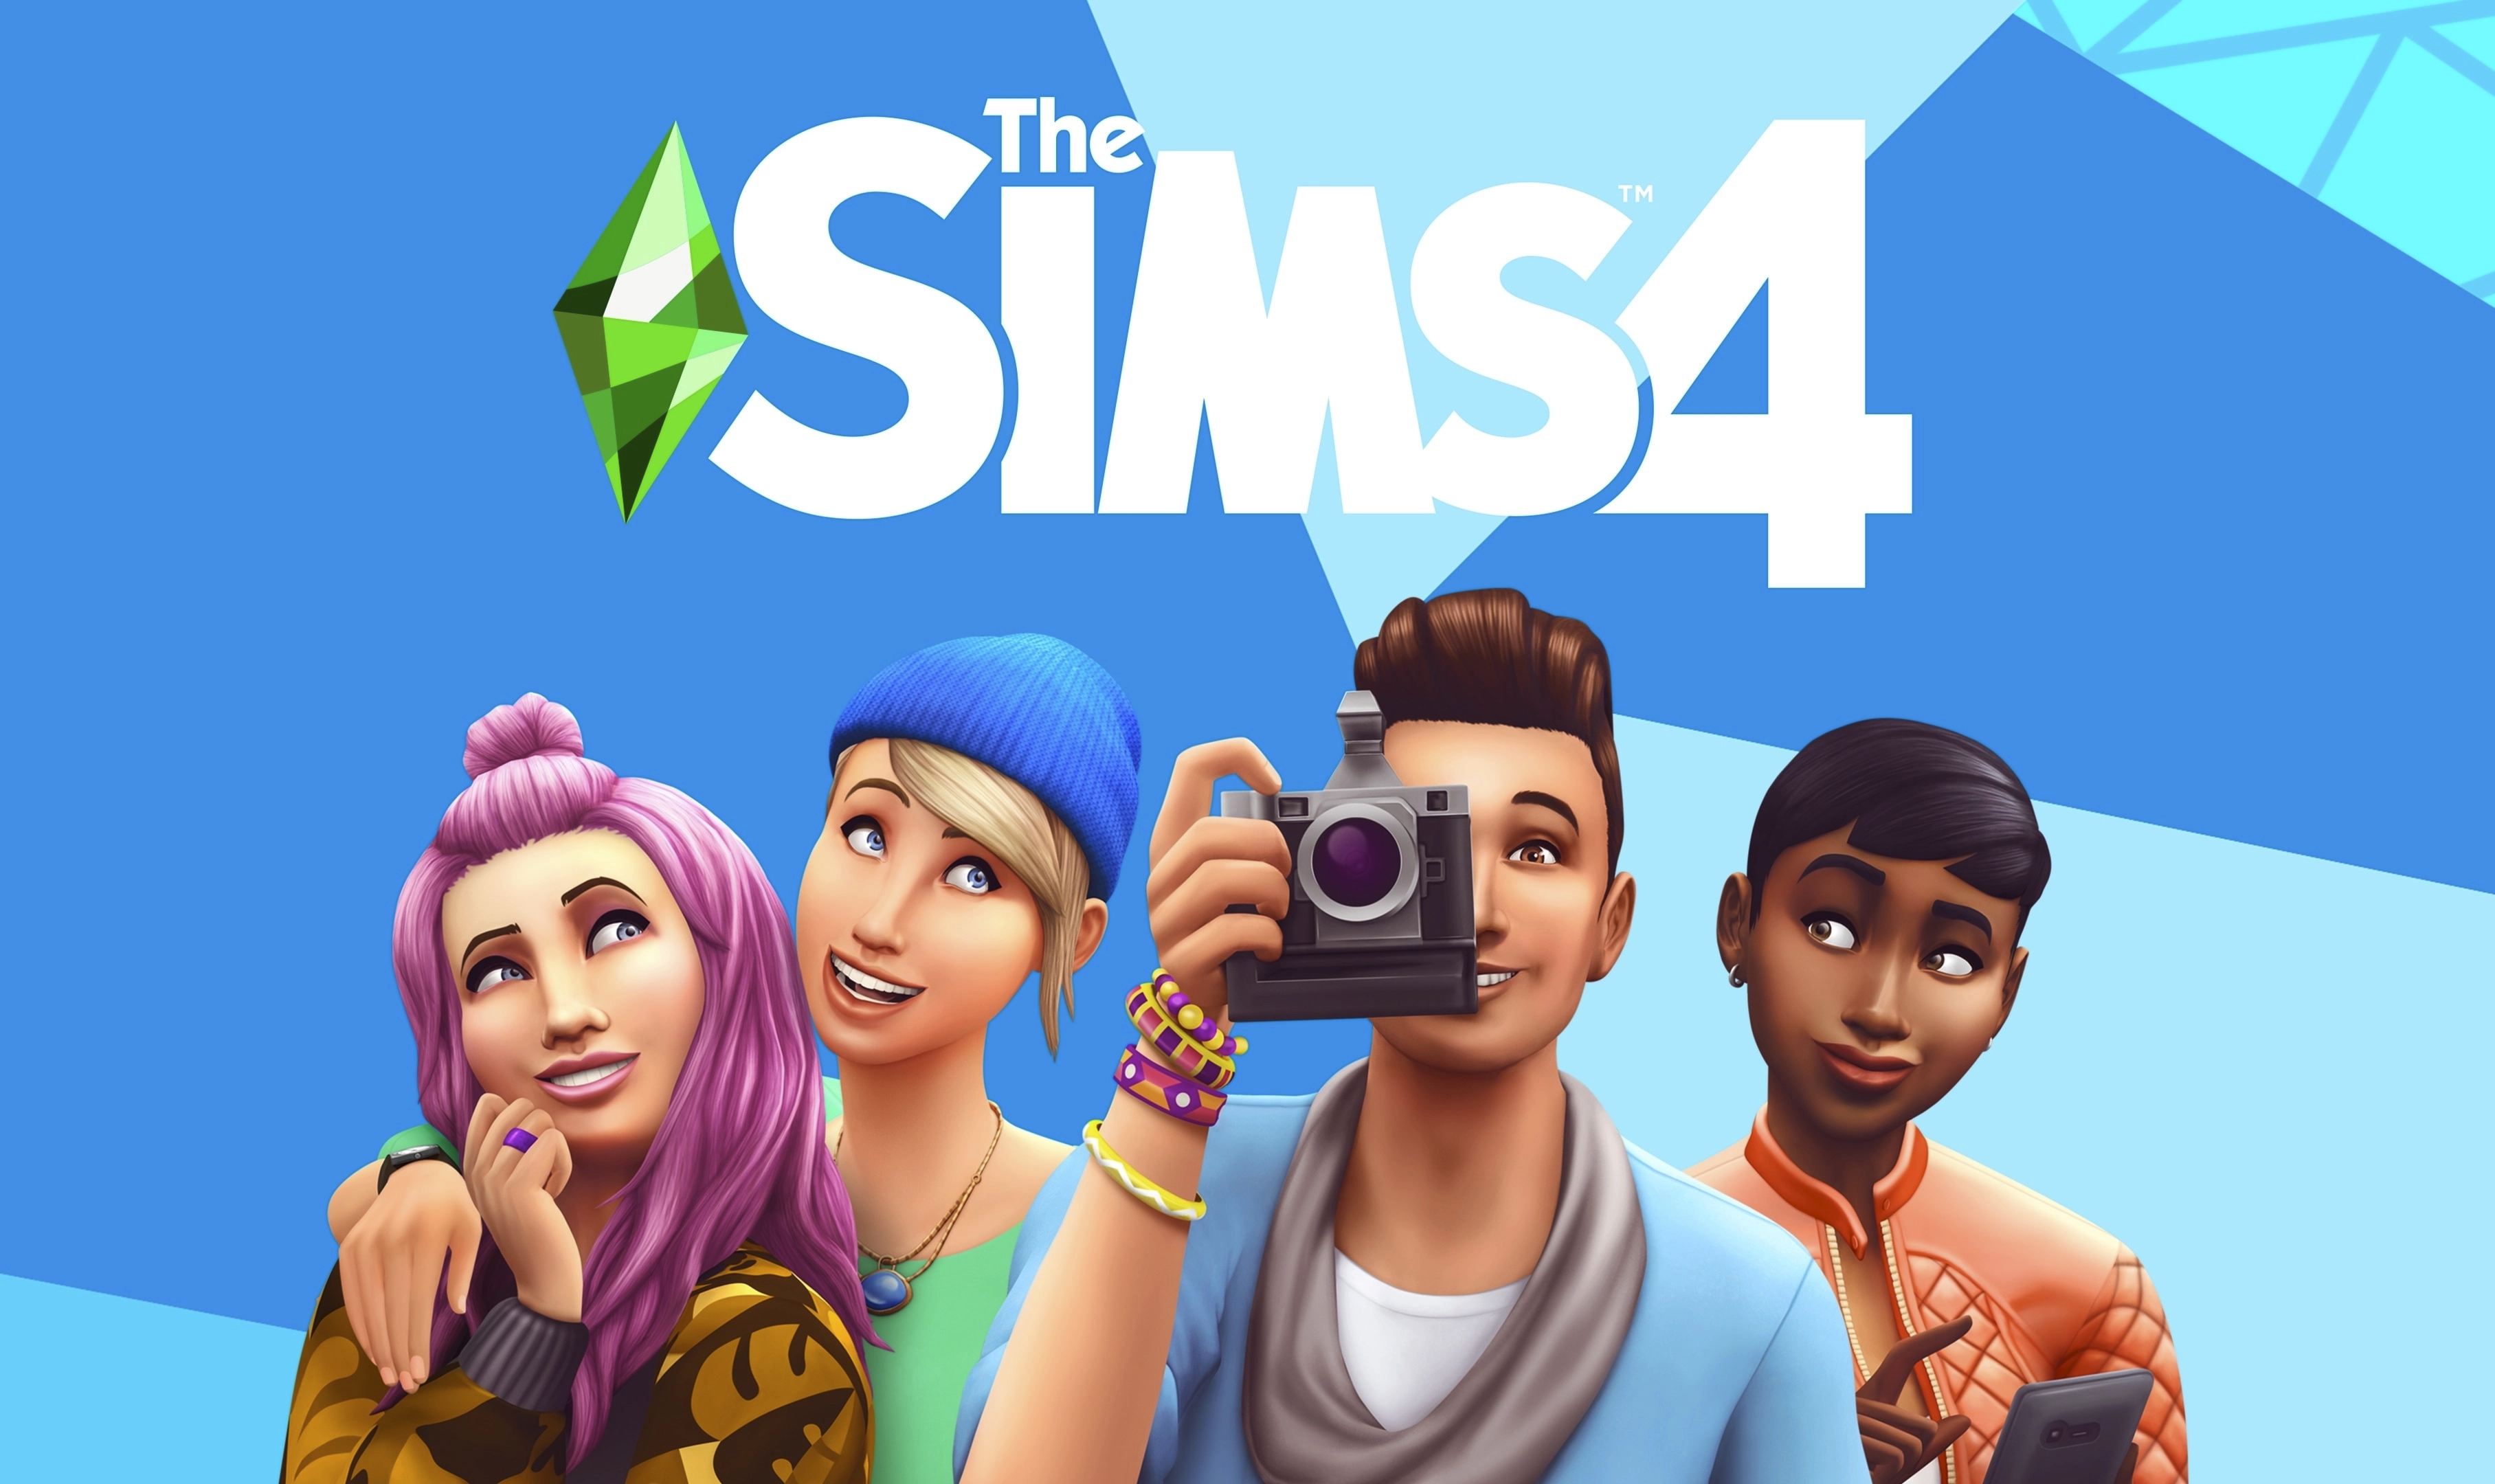 3. The Sims 4